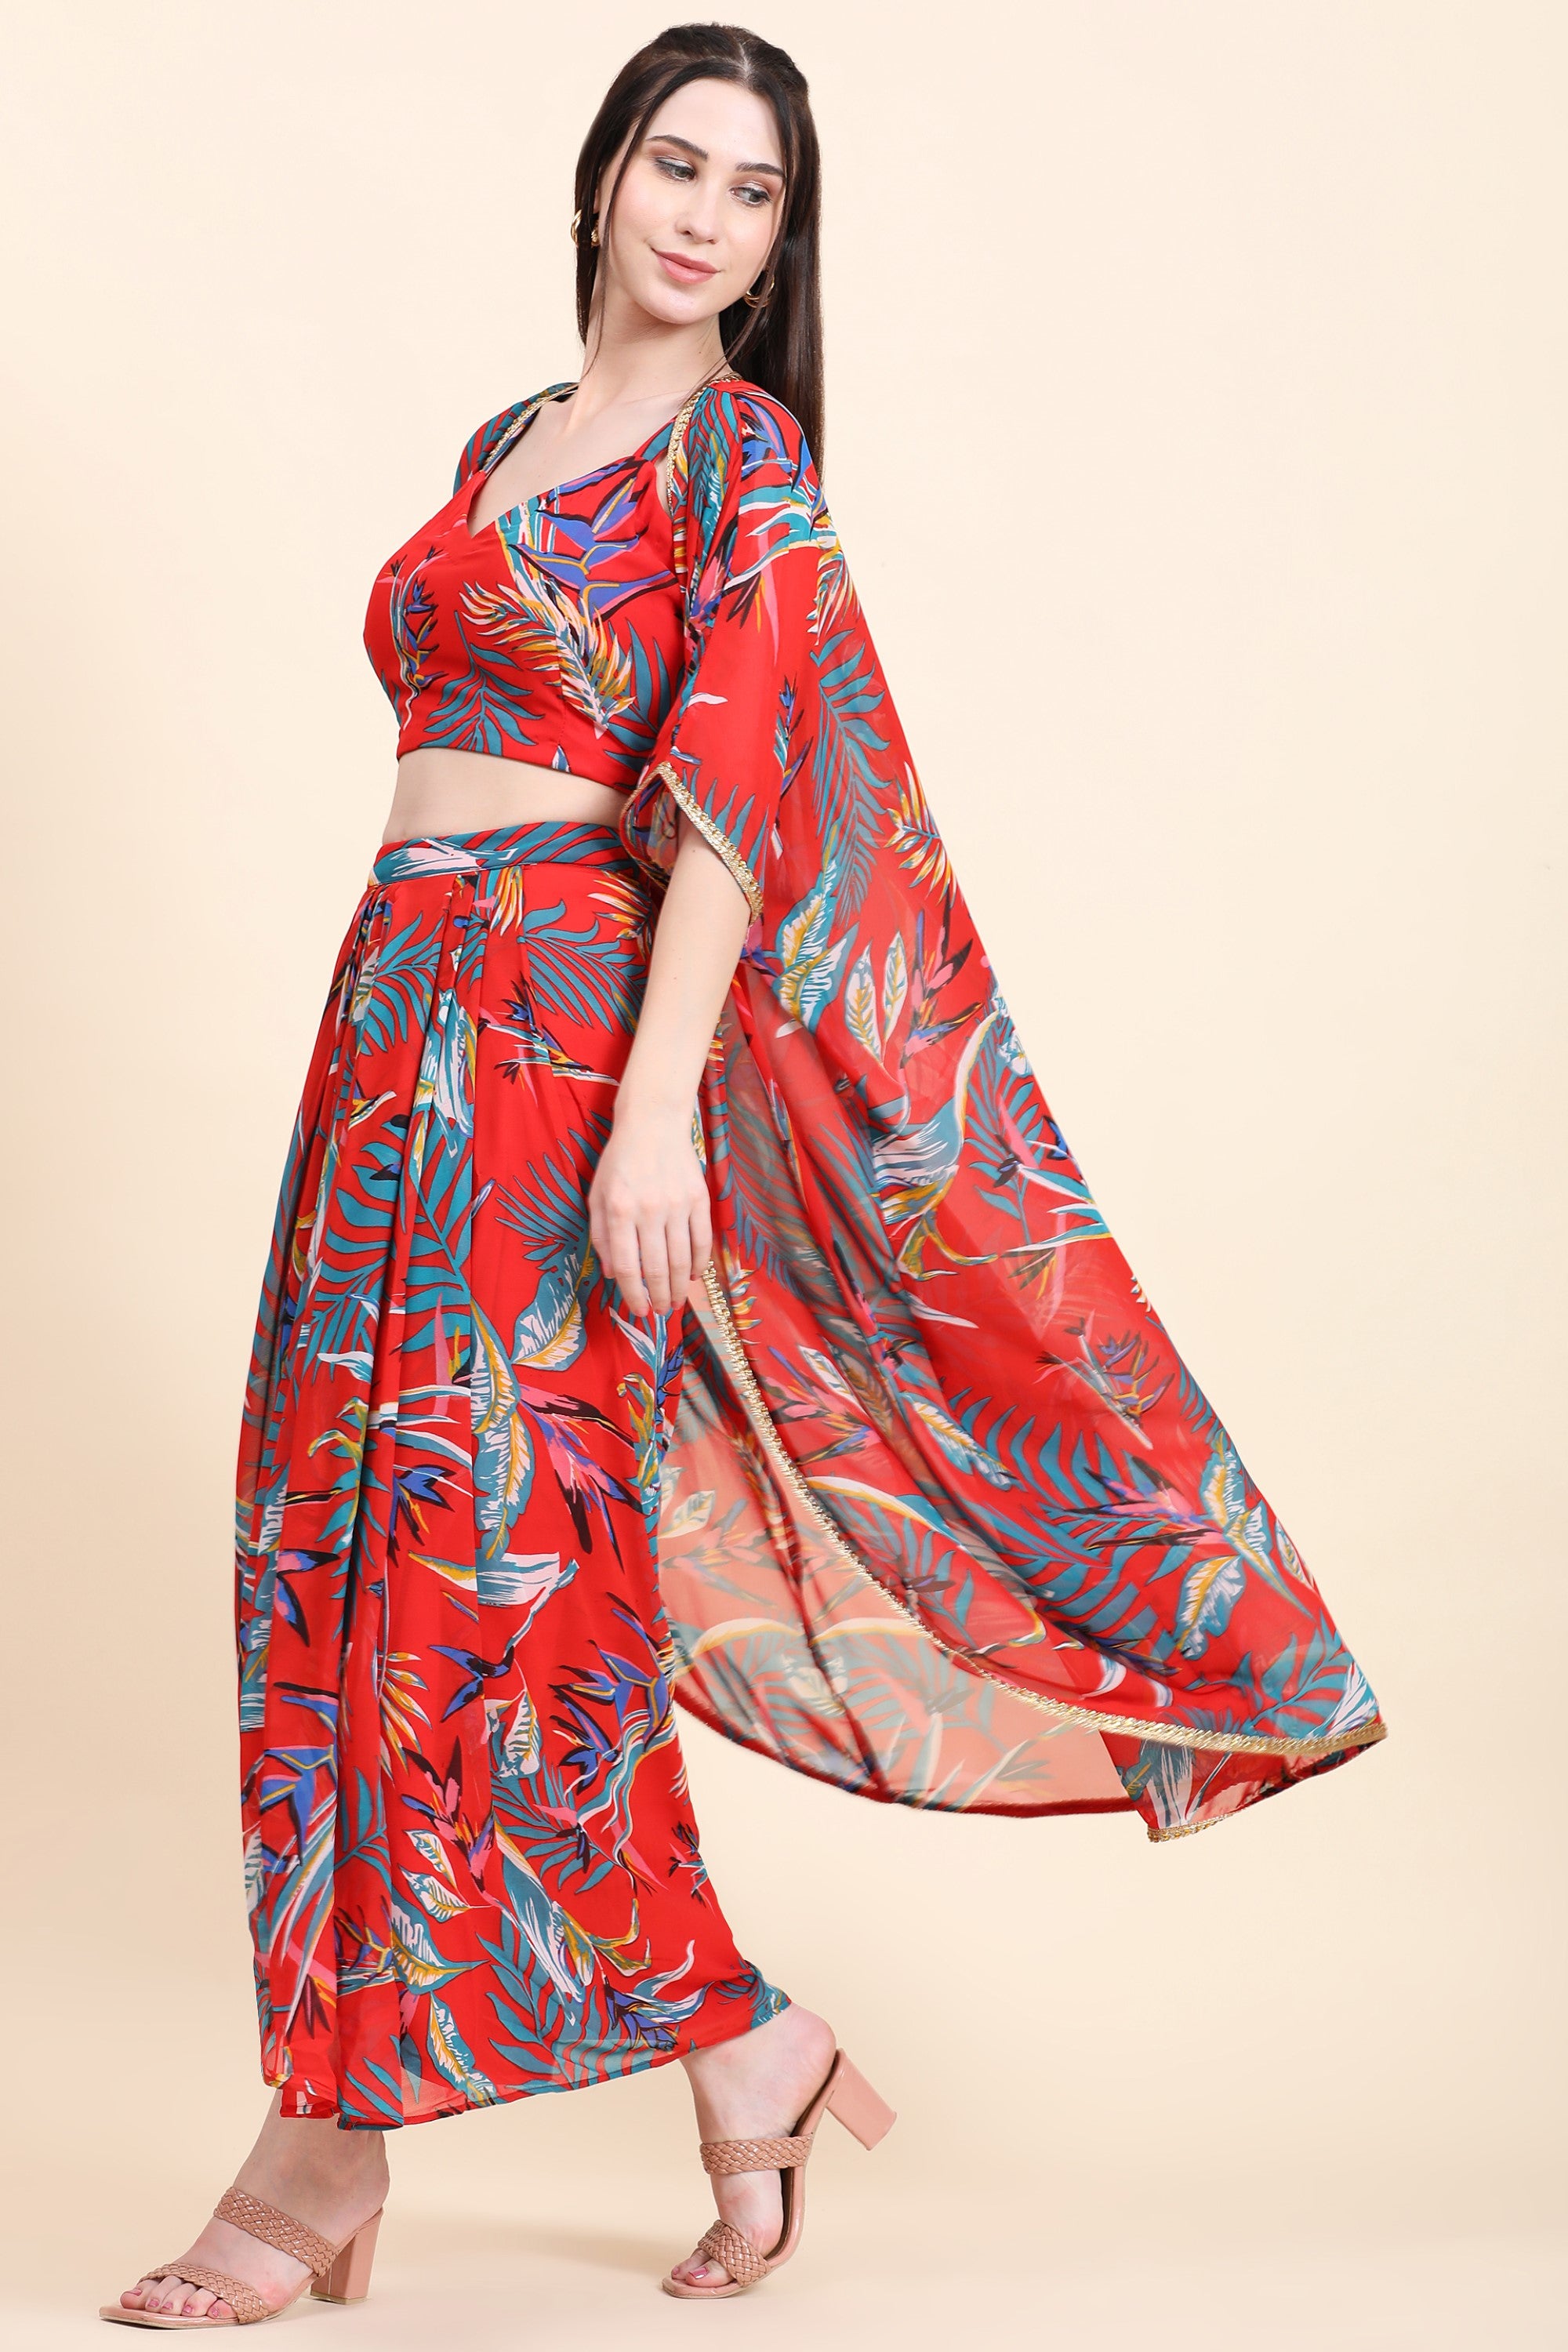 Women's Red base Leaf print Georgette Blouse, Cape, Dhoti drape Skirt set - MIRACOLOS by Ruchi